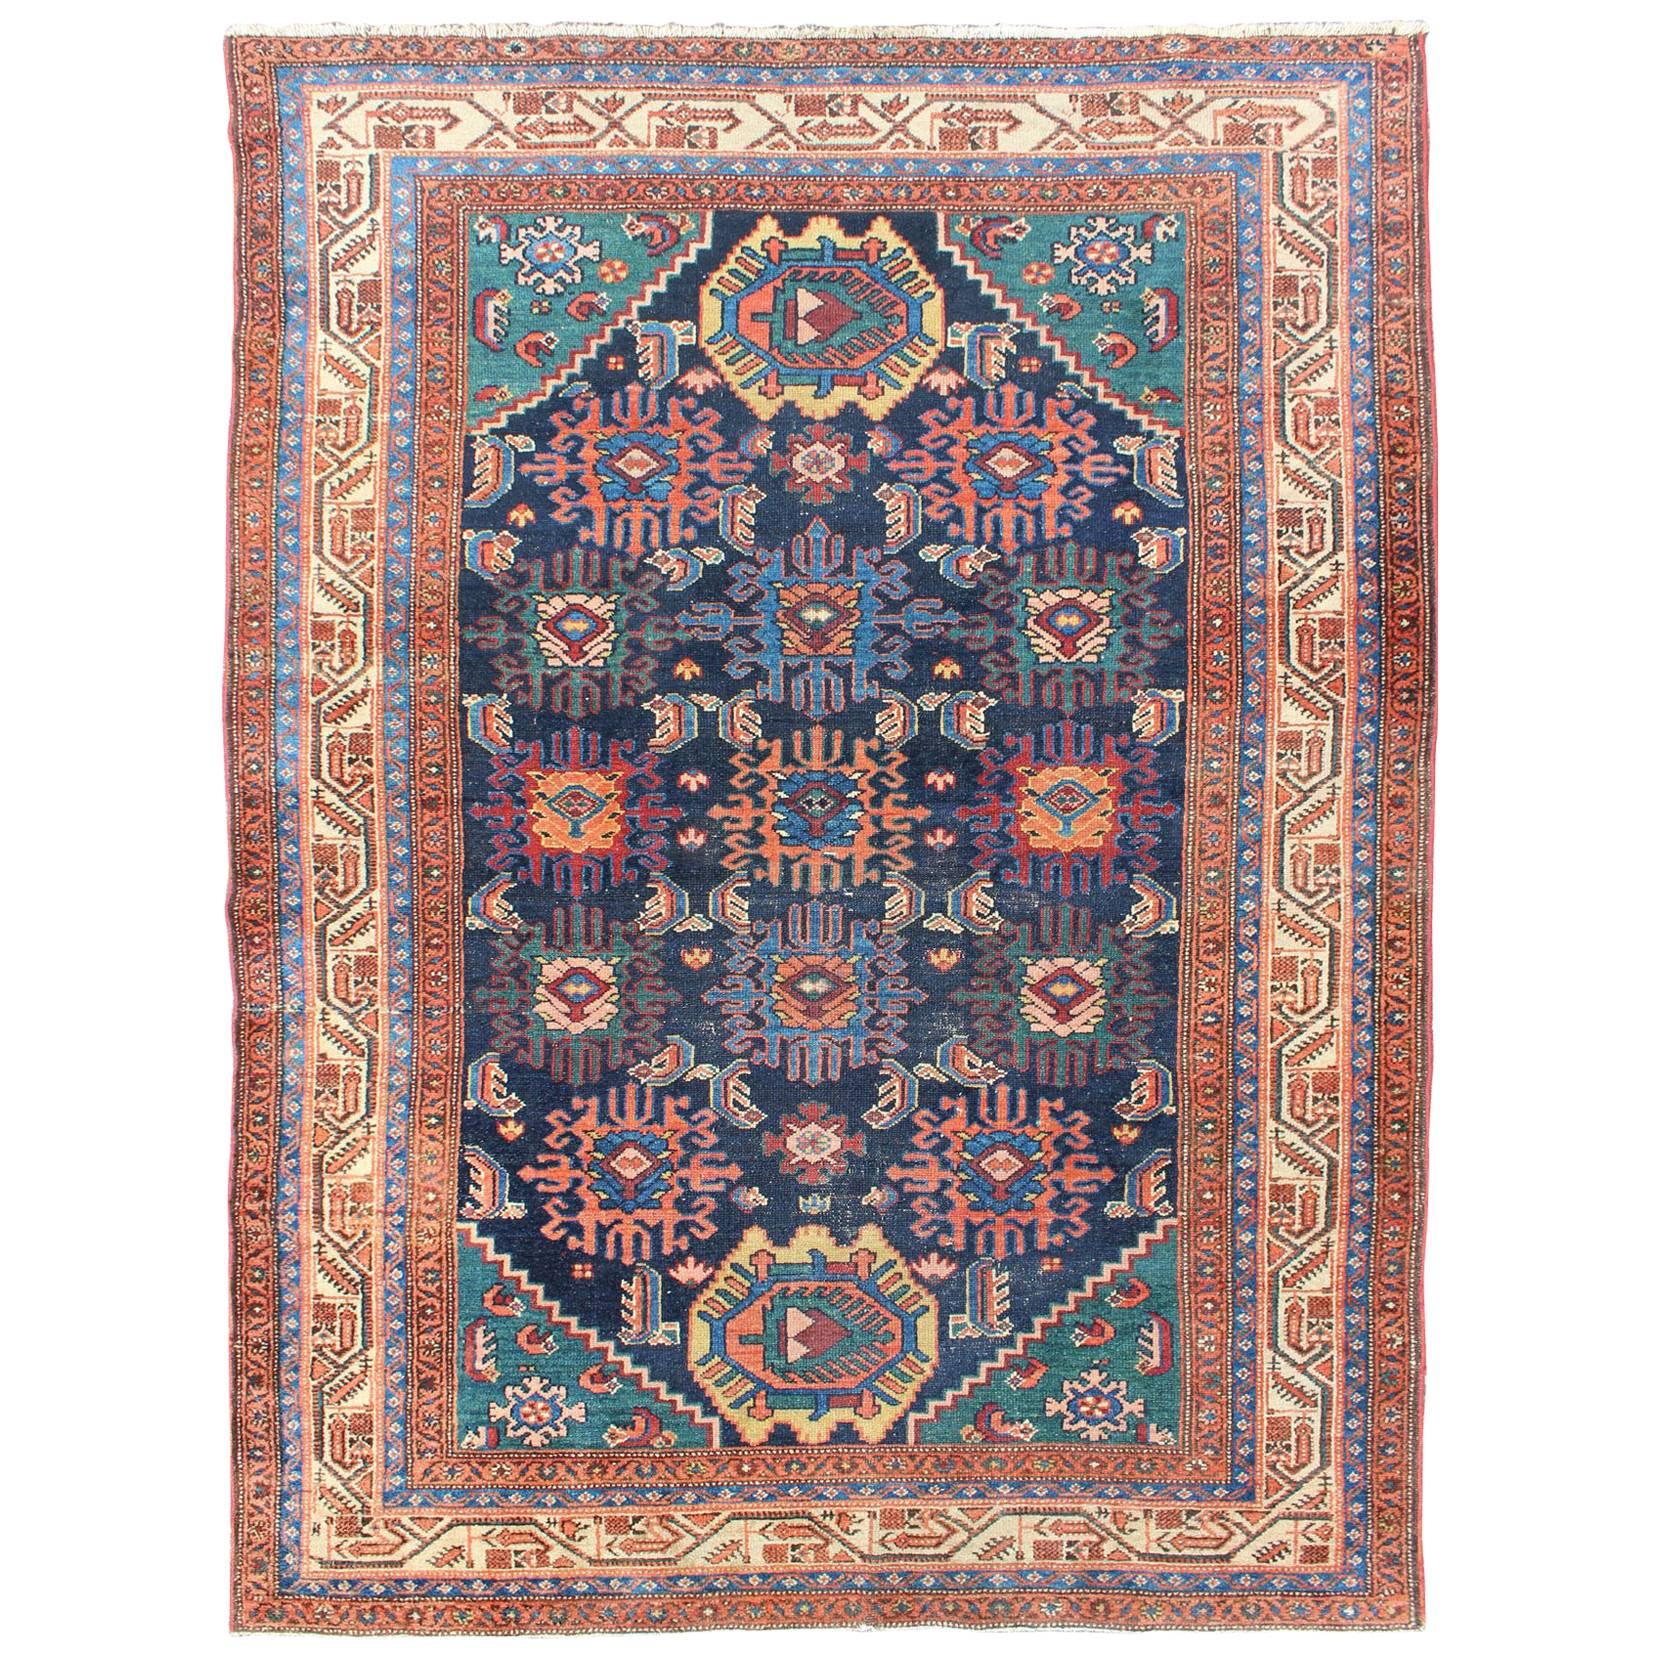 Antique Persian Malayer Carpet with Colorful, All-Over Sub-Geometric Design